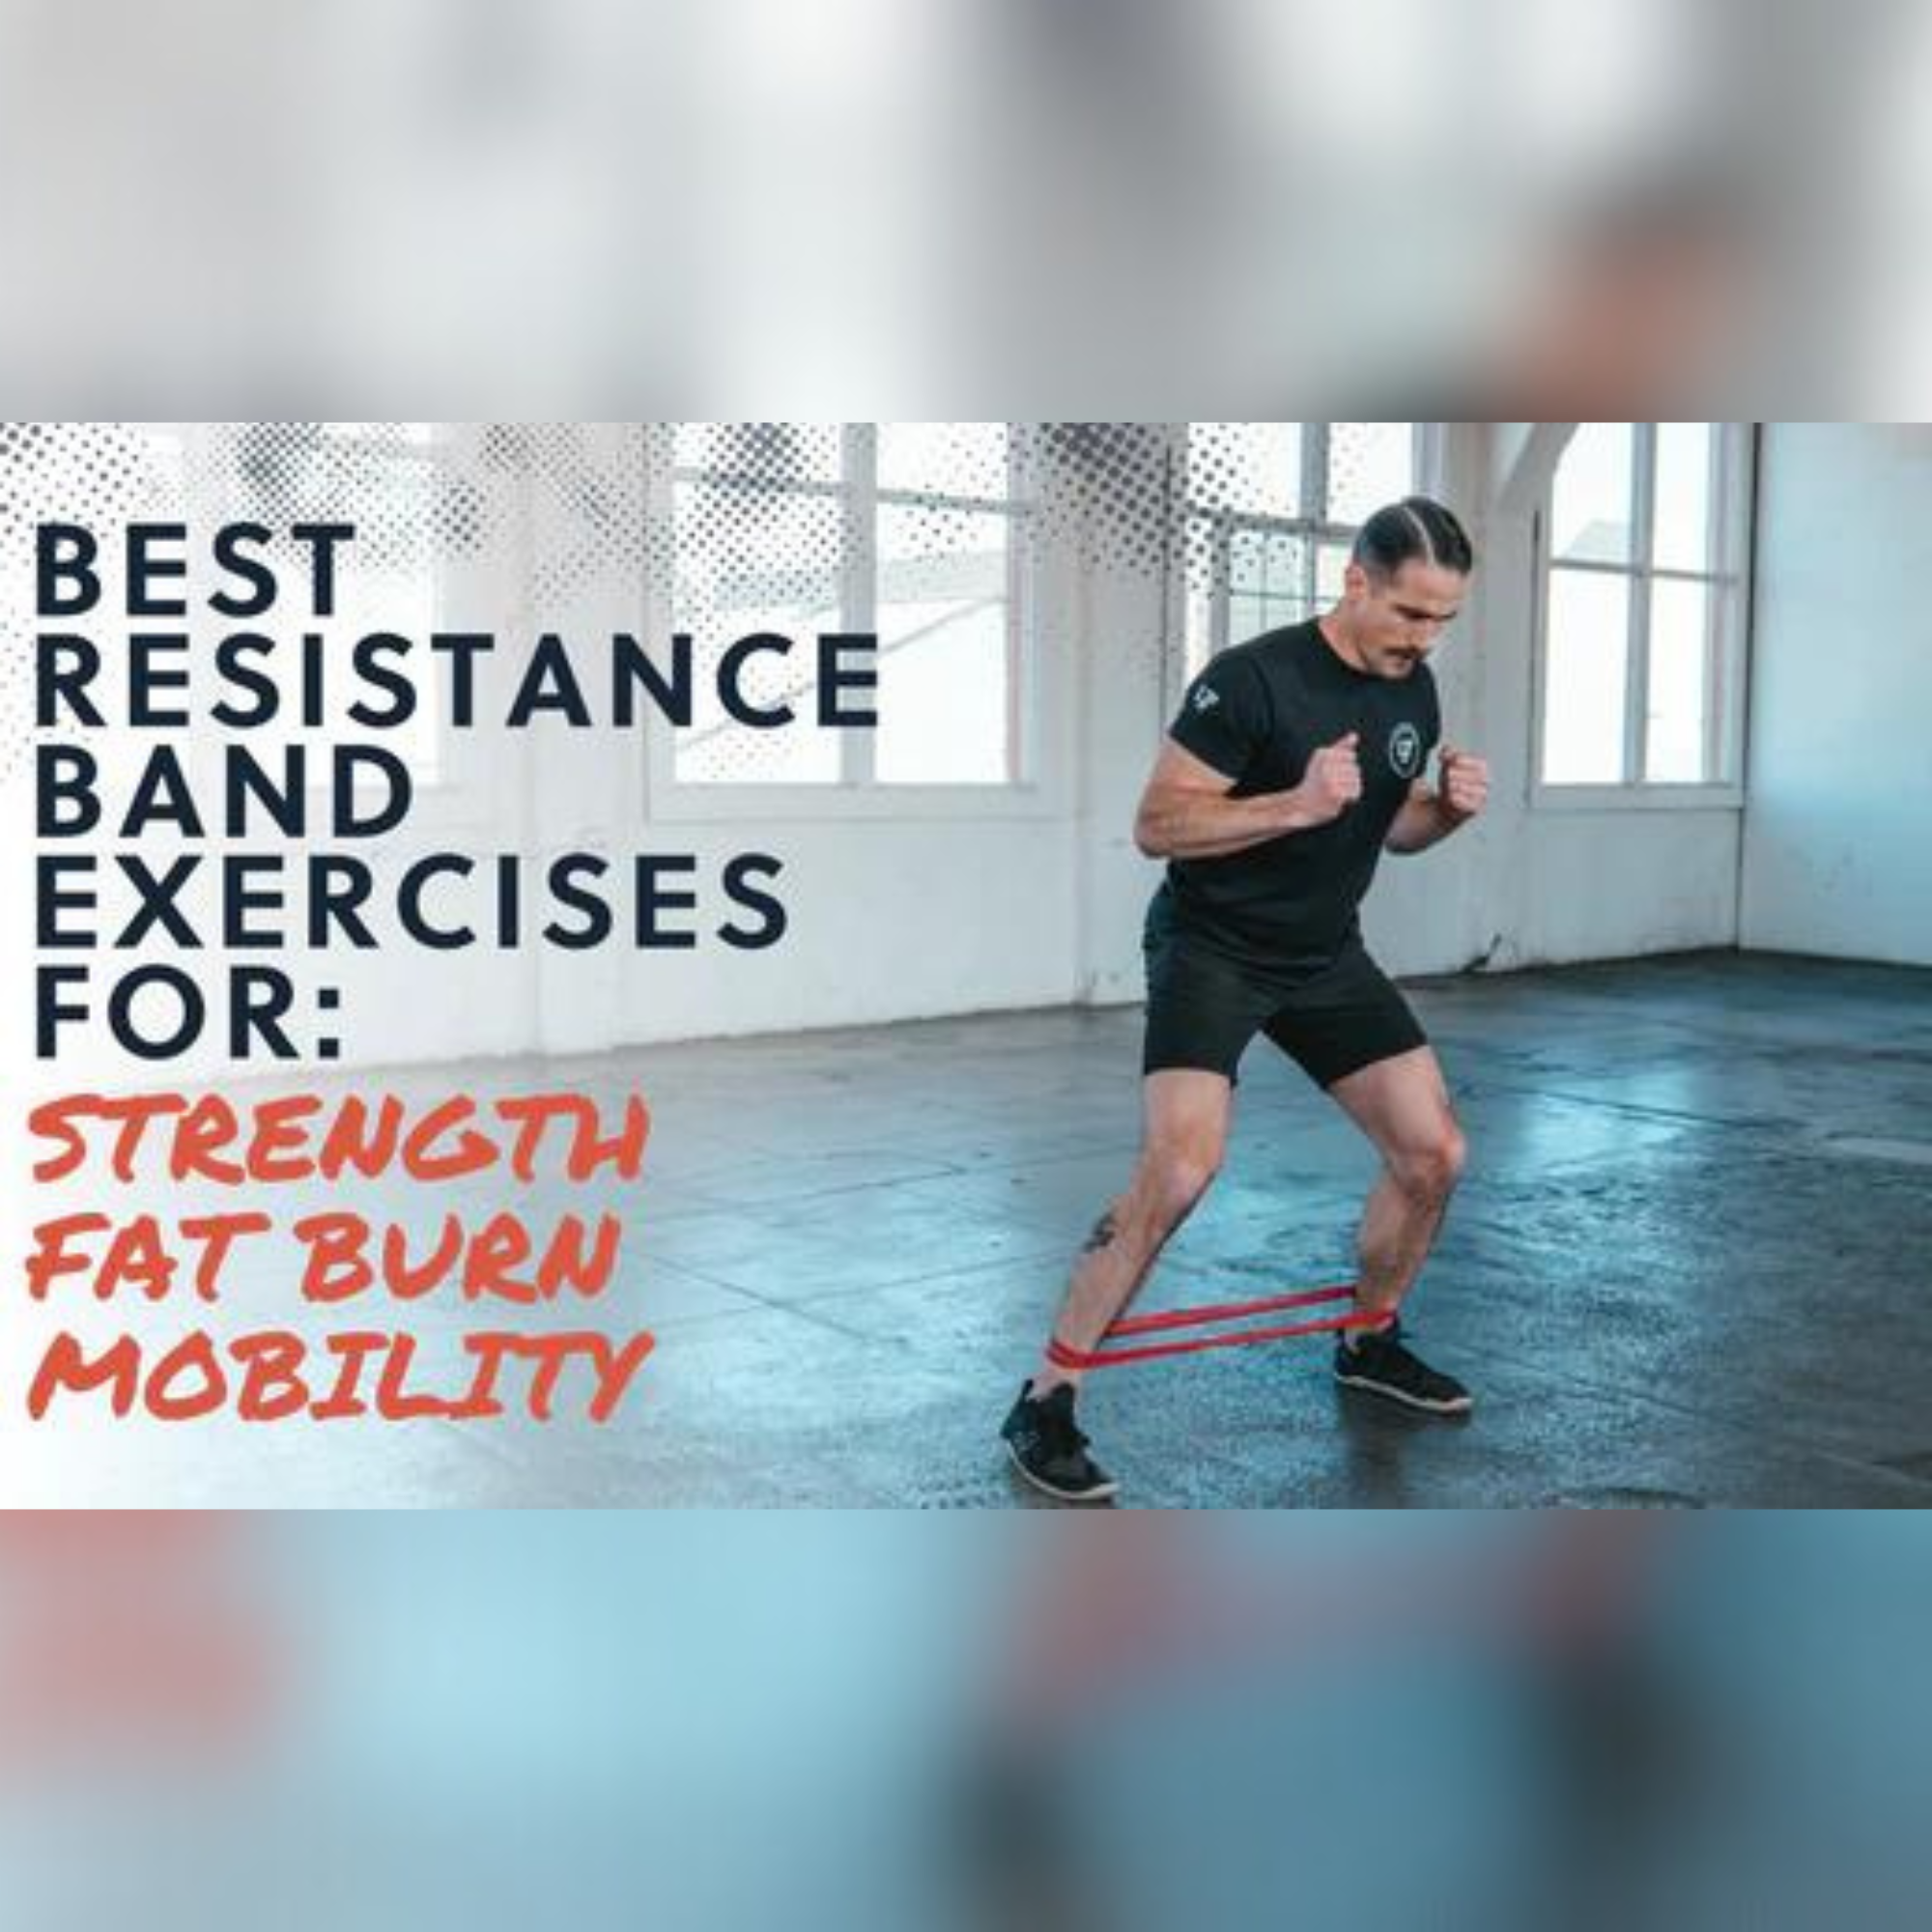 The Best Resistance Band Exercises for Building Strength, Burning